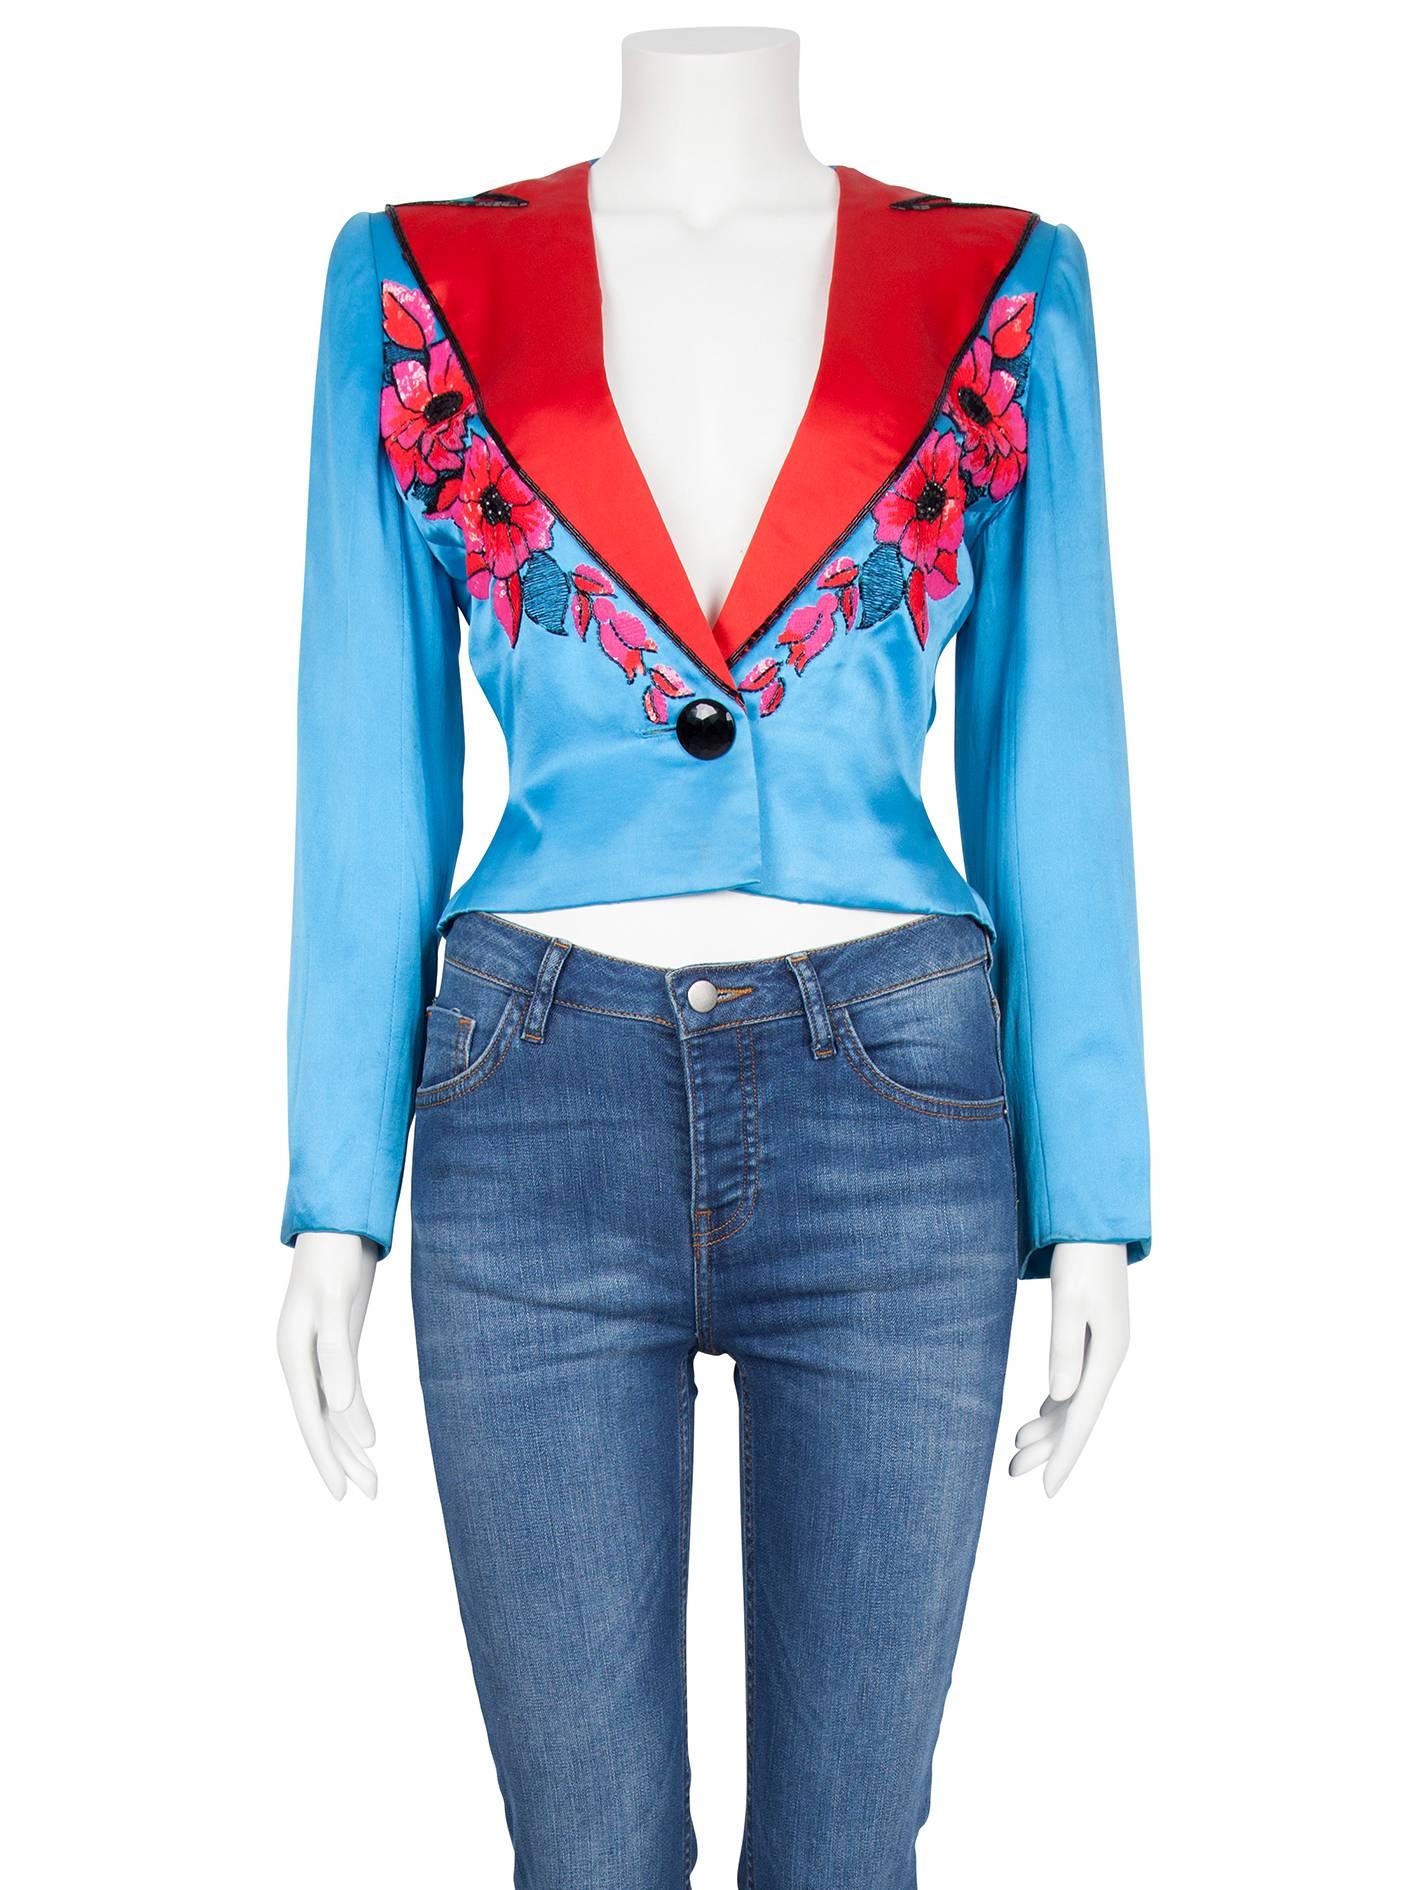 A rare Christian Dior couture bright blue silk boxy jacket from the Spring/Summer 1983 collection. The soft-shaped fitted jacket is constructed from bright blue silk with red silk lapels trimmed in black beading and features striking pink and red